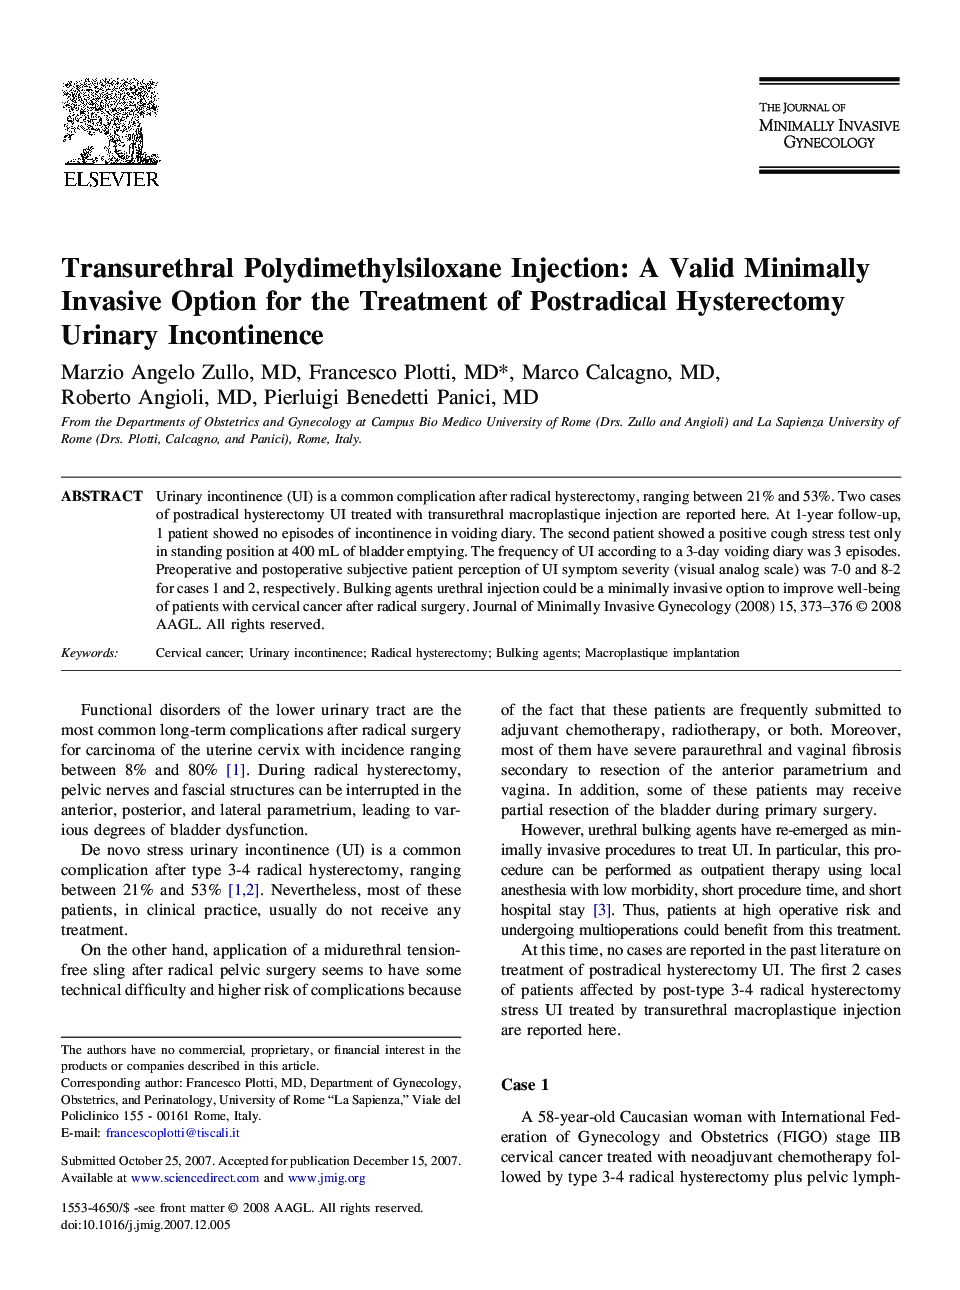 Transurethral Polydimethylsiloxane Injection: A Valid Minimally Invasive Option for the Treatment of Postradical Hysterectomy Urinary Incontinence